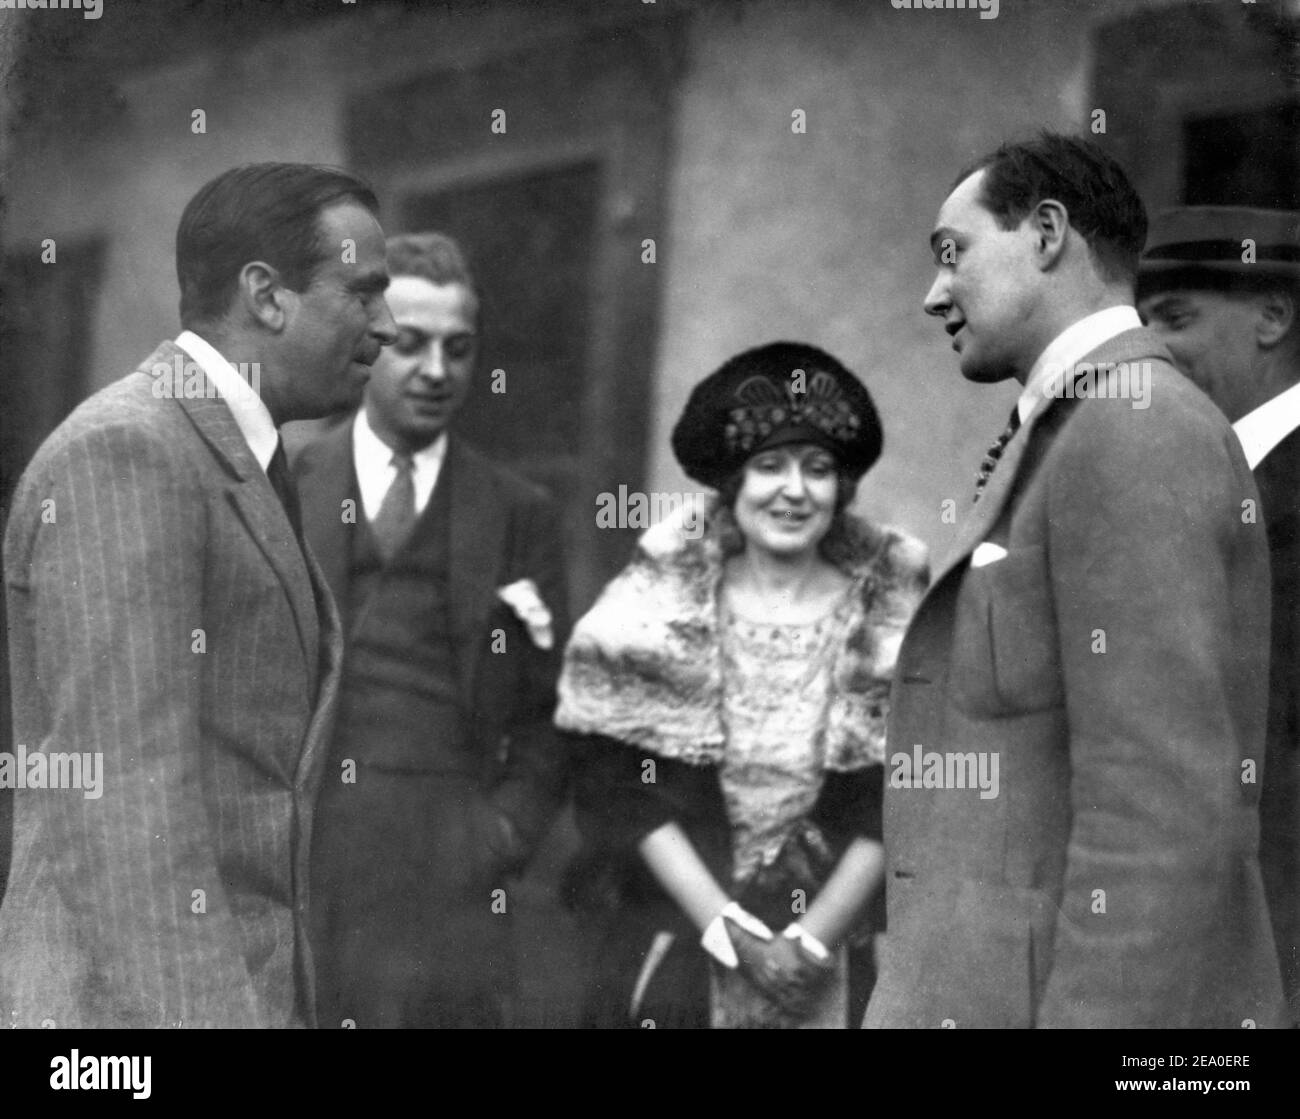 DOUGLAS FAIRBANKS SR and his Costume Designer MITCHELL LEISEN candid while working on pre-production for ROBIN HOOD 1922 with visitors Mrs LESLIE CARTER CHARLES RAY and JOHN DREW Stock Photo